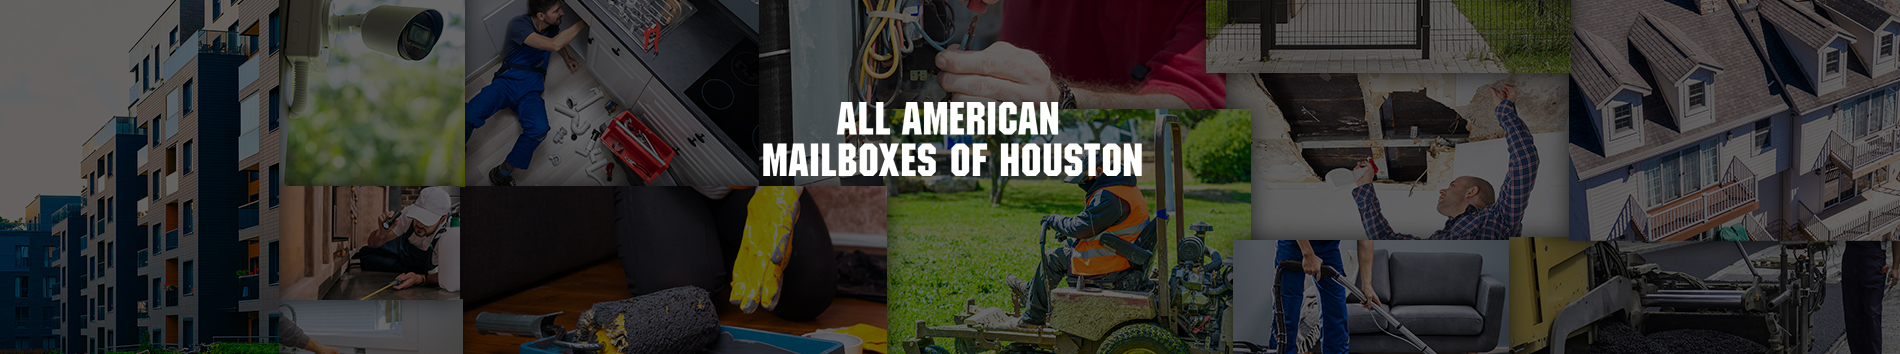 All American Mailboxes of Houston